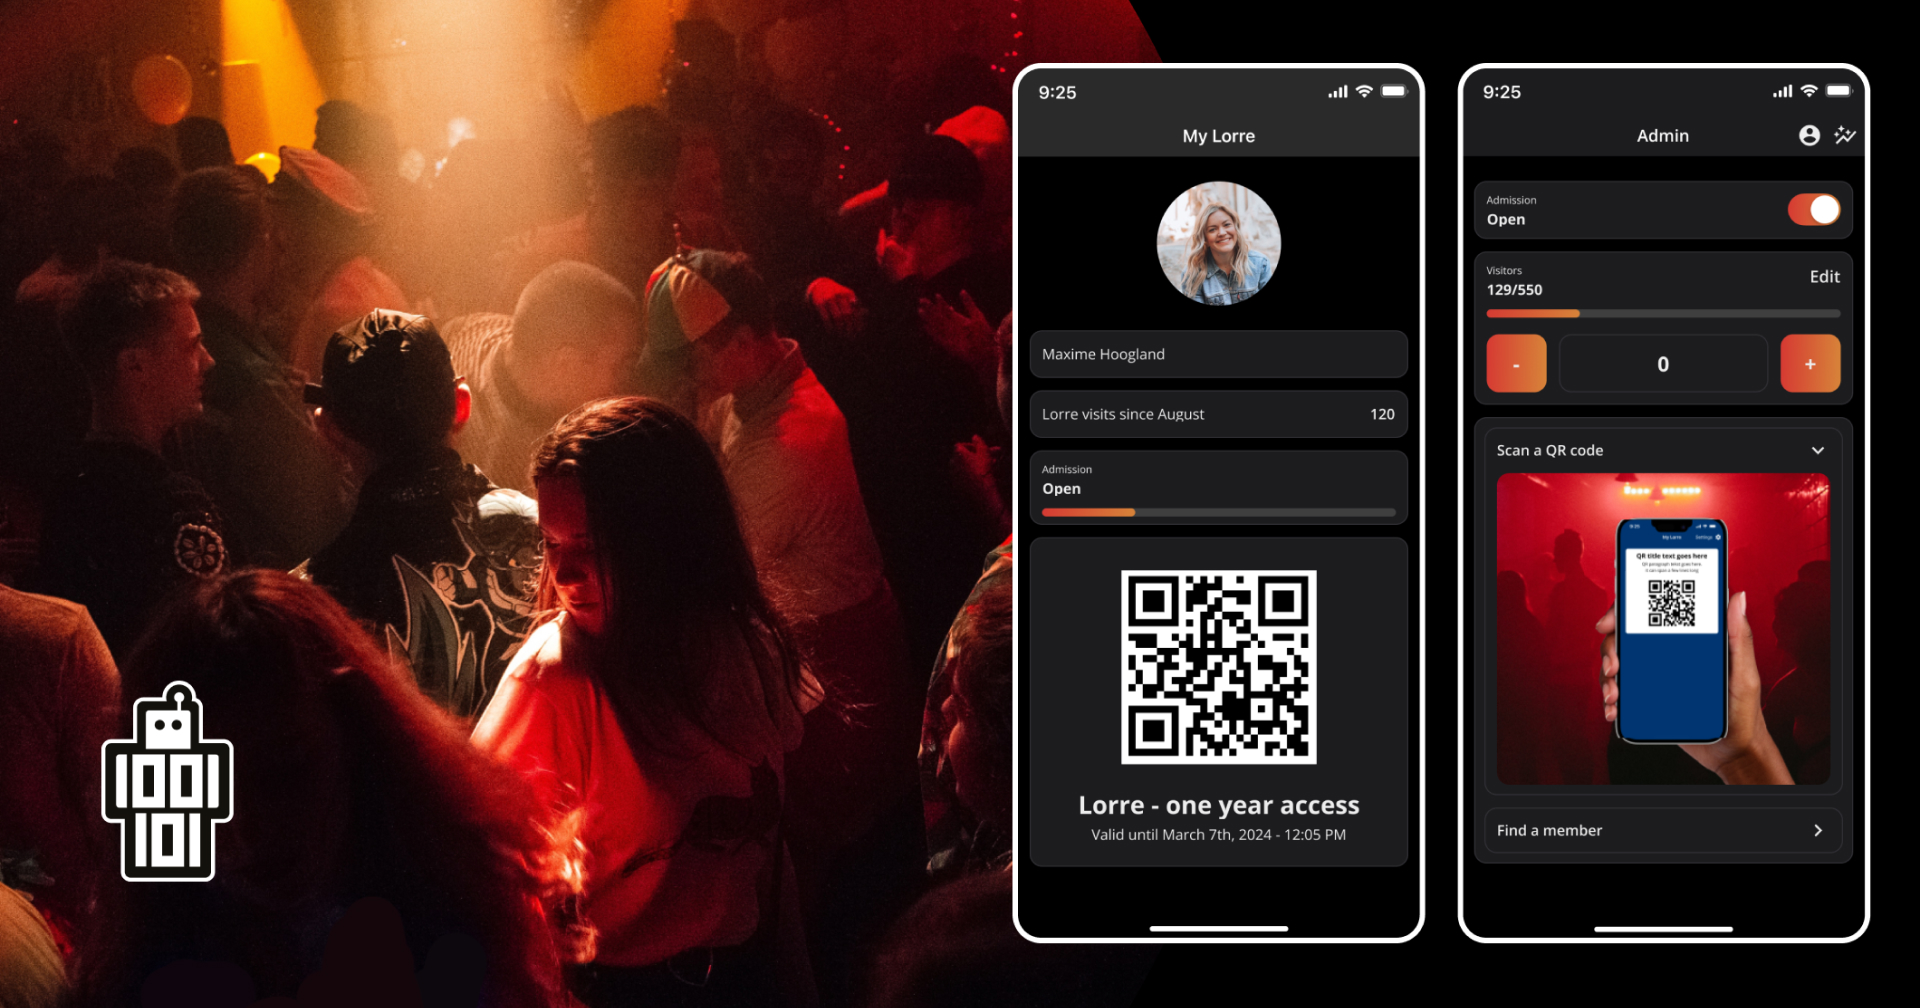 The Lorre app is live - The app for students disco Lorre is live!